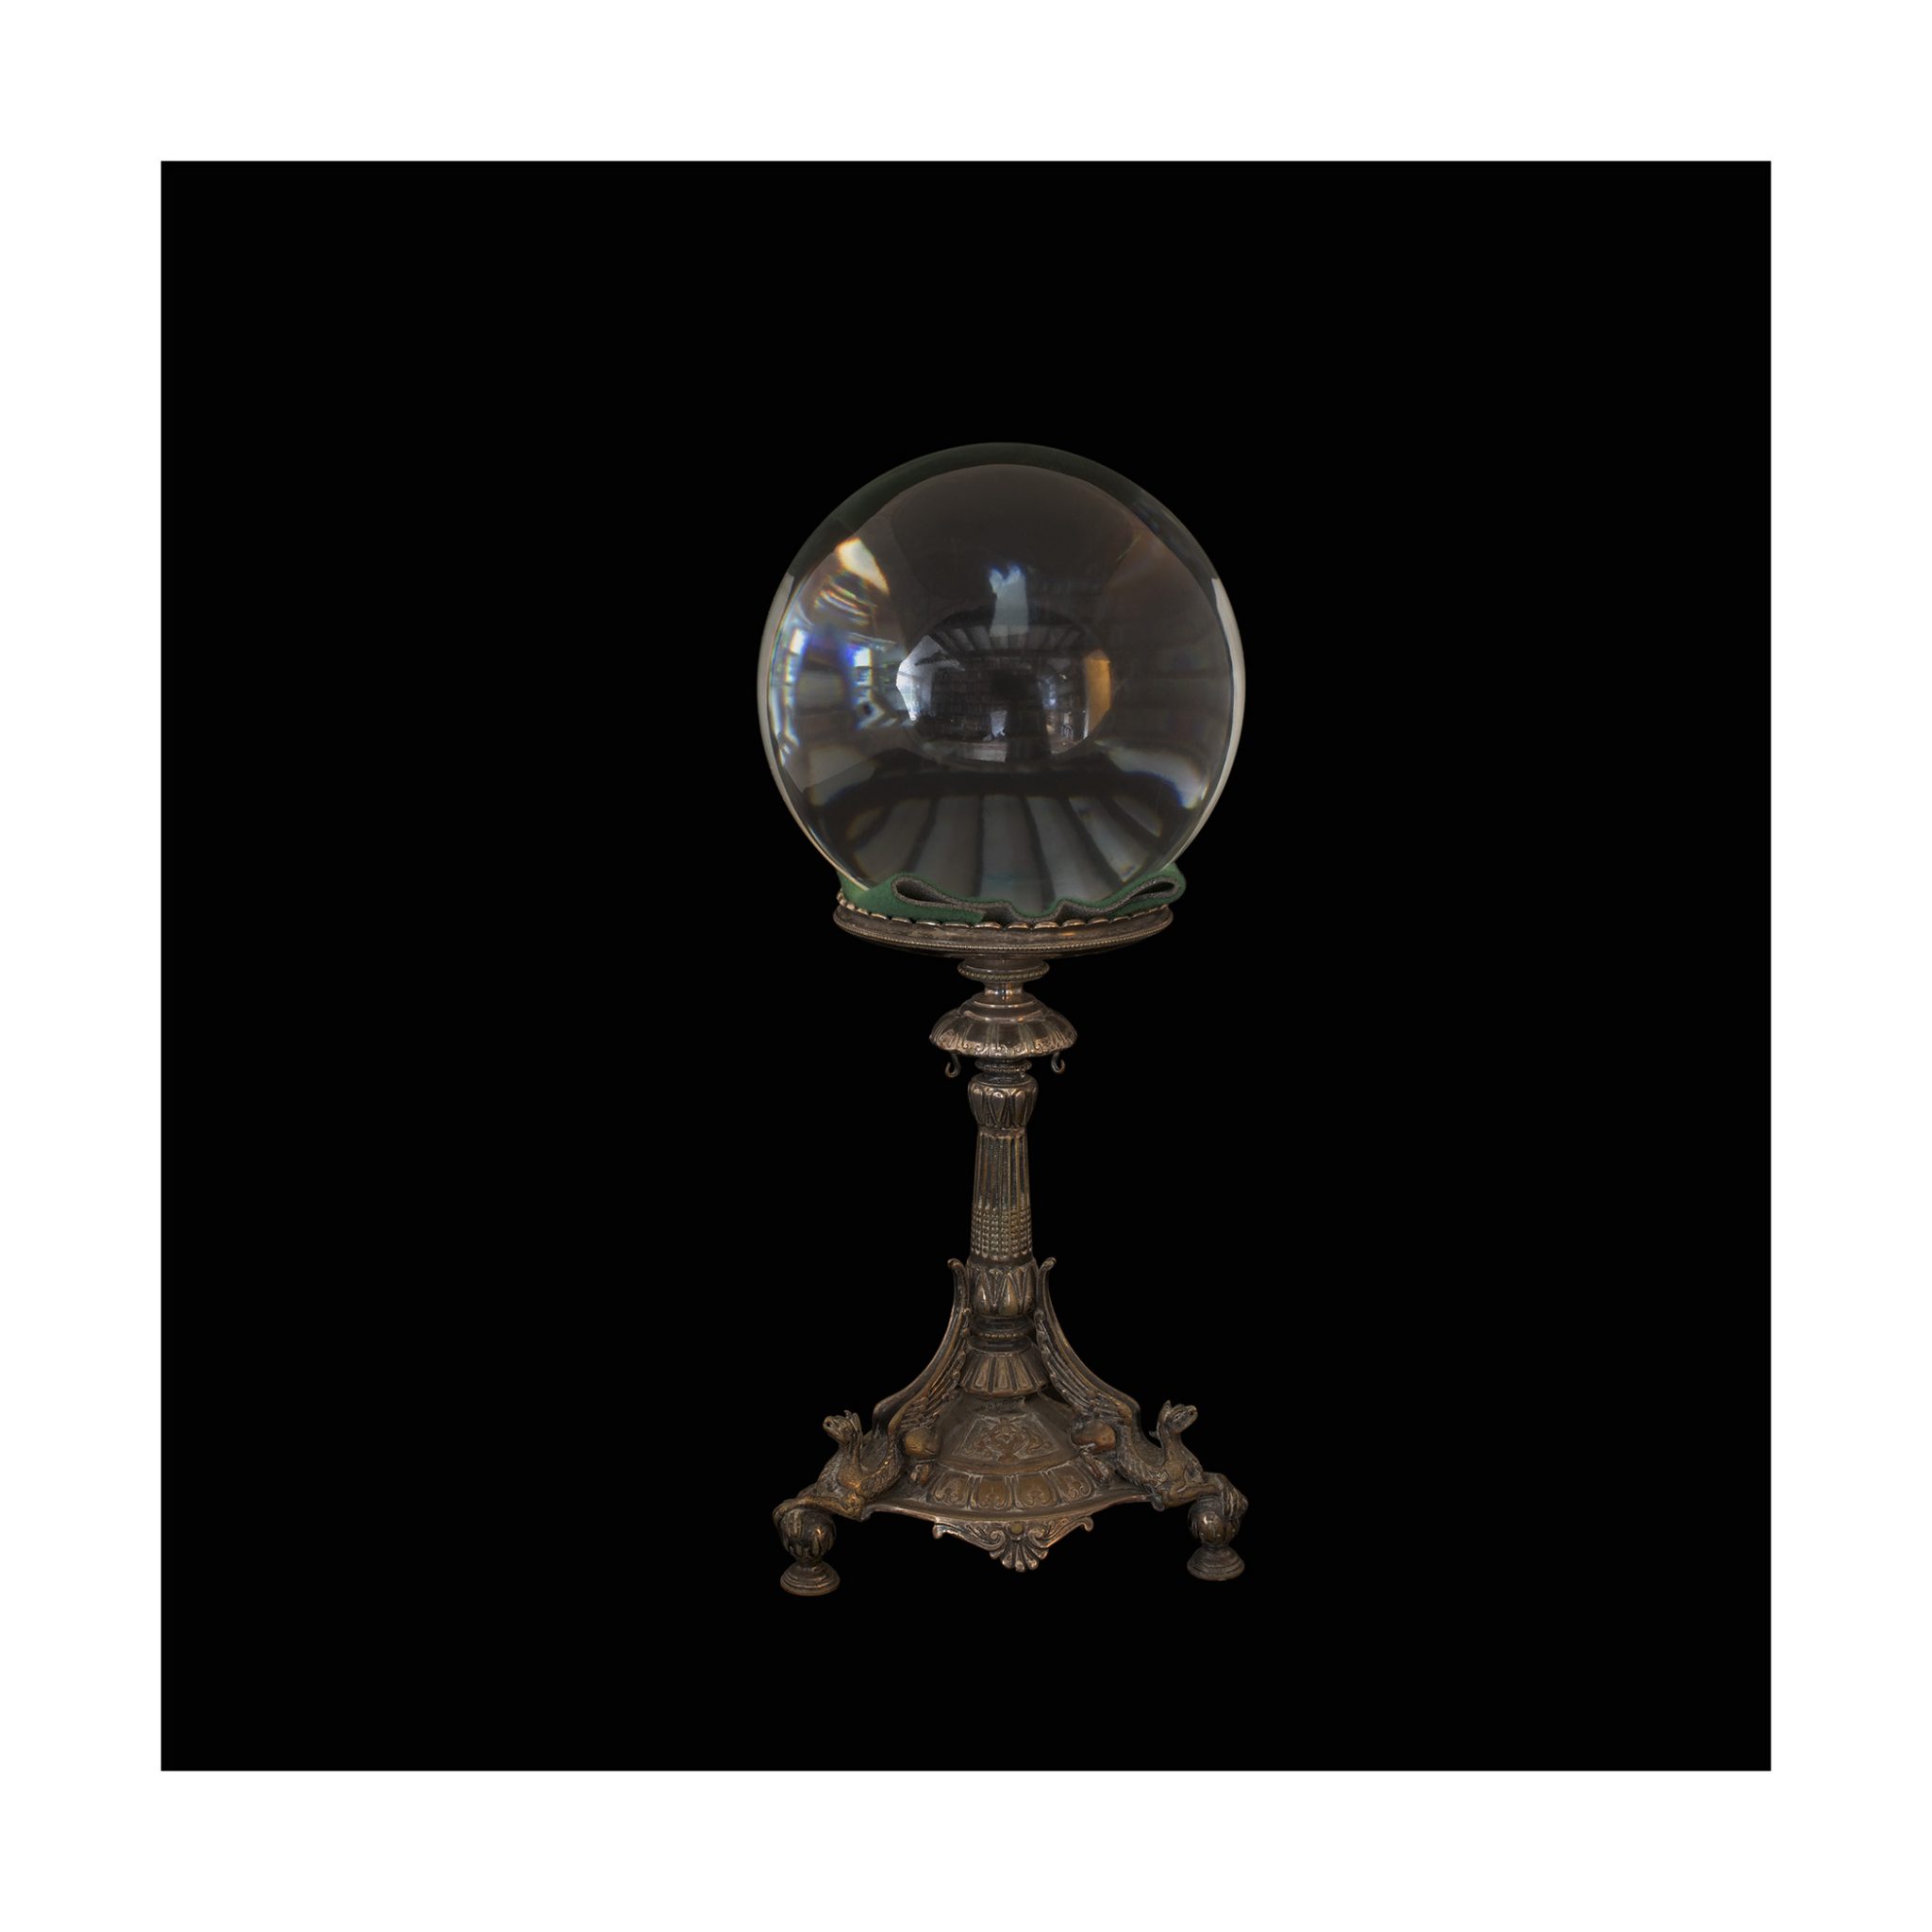 Photograph: Crystal Ball - Museum of Witchcraft and Magic